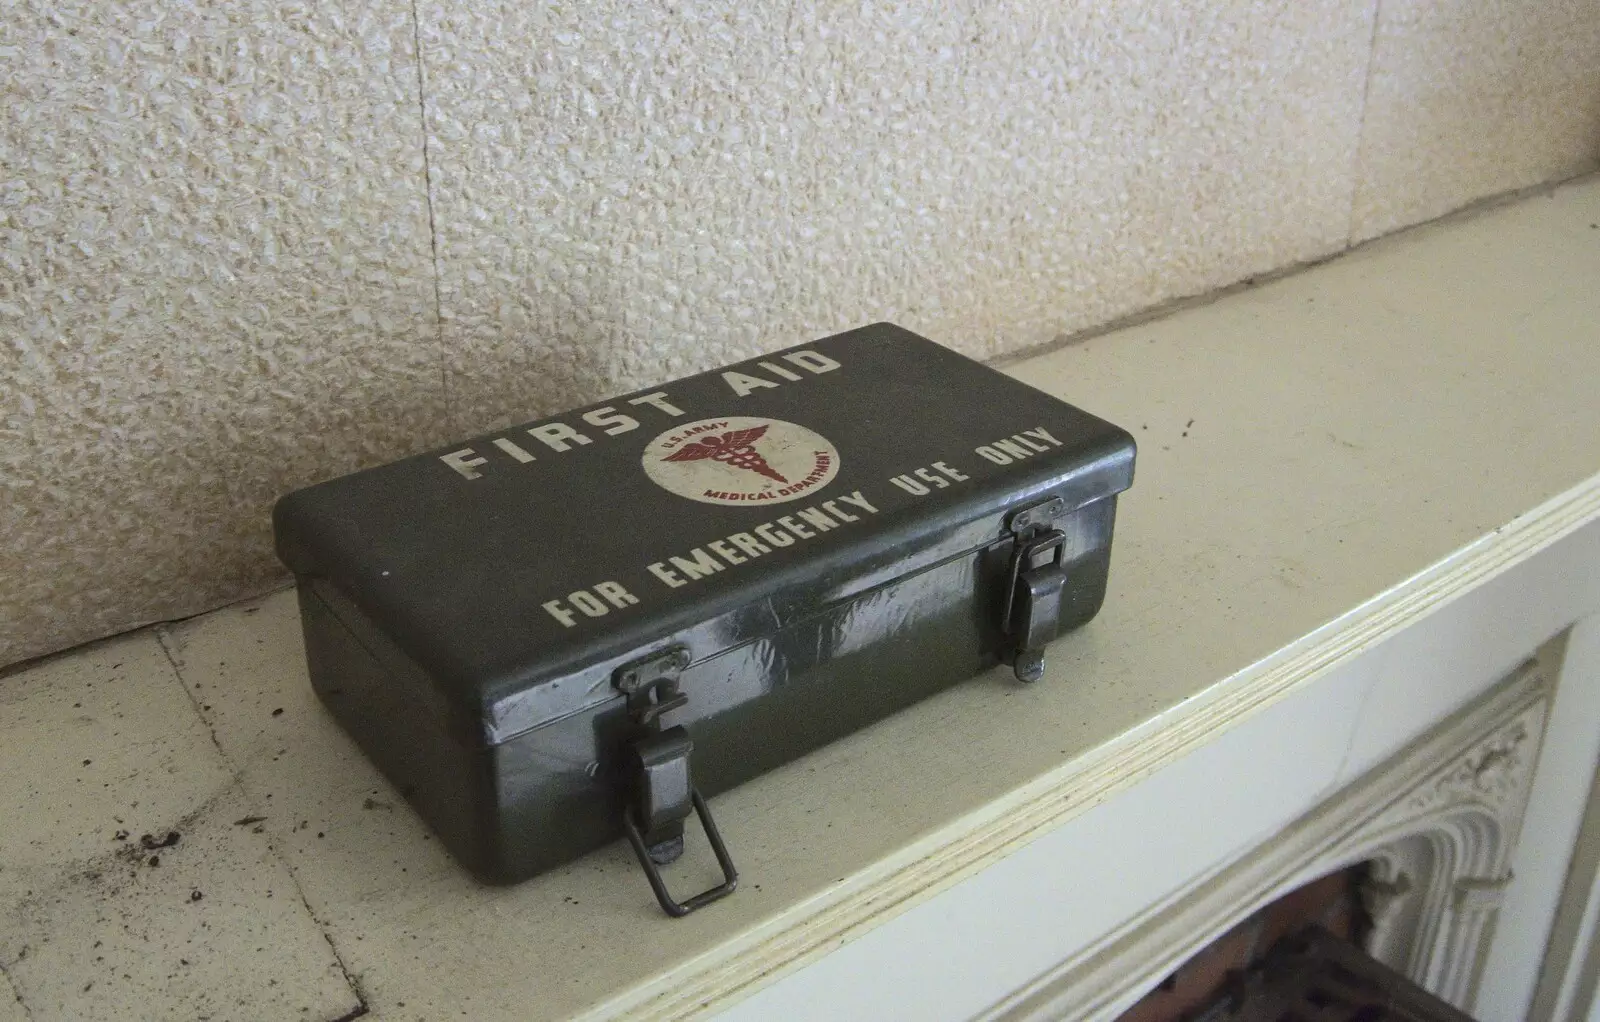 An original US Army Medical Department box, from A 1940s Timewarp, Site 4, Bungay Airfield, Flixton, Suffolk - 9th June 2022